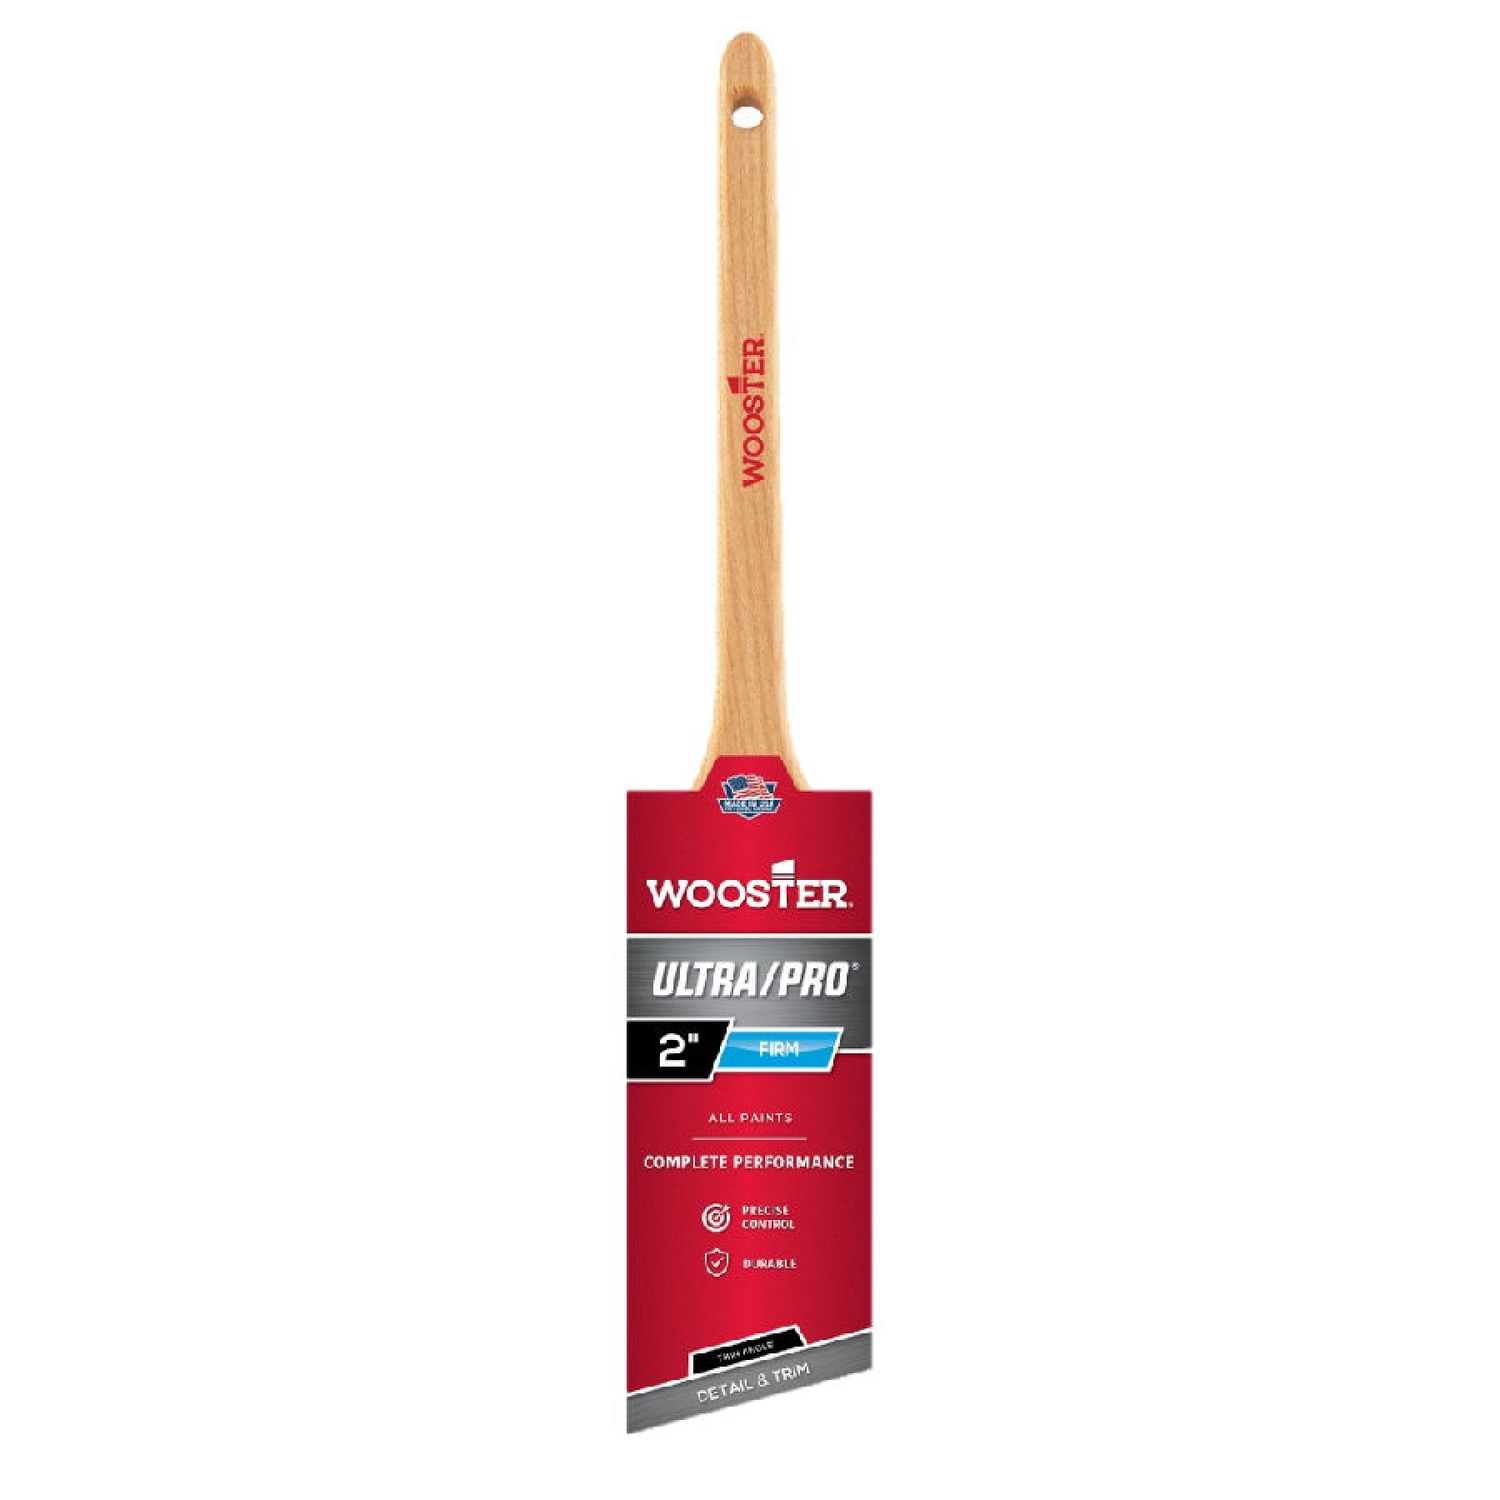 Photos - Putty Knife / Painting Tool Wooster Ultra/Pro 2 in. Angle Paint Brush 4181-2